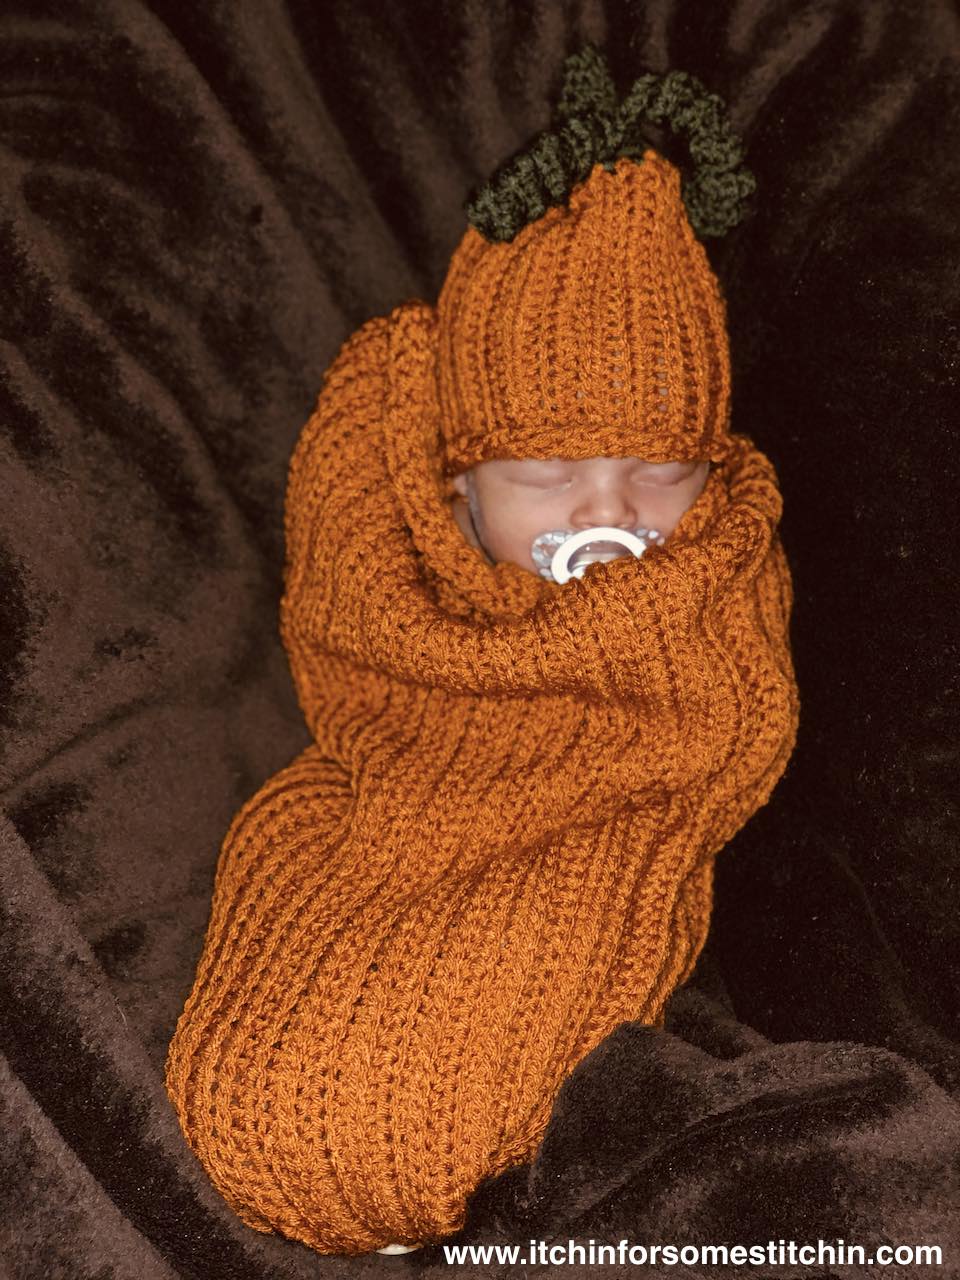 Crochet pumpkin sleep sack, mitts, and hat for baby patterns by www.itchinforsomestitchin.com